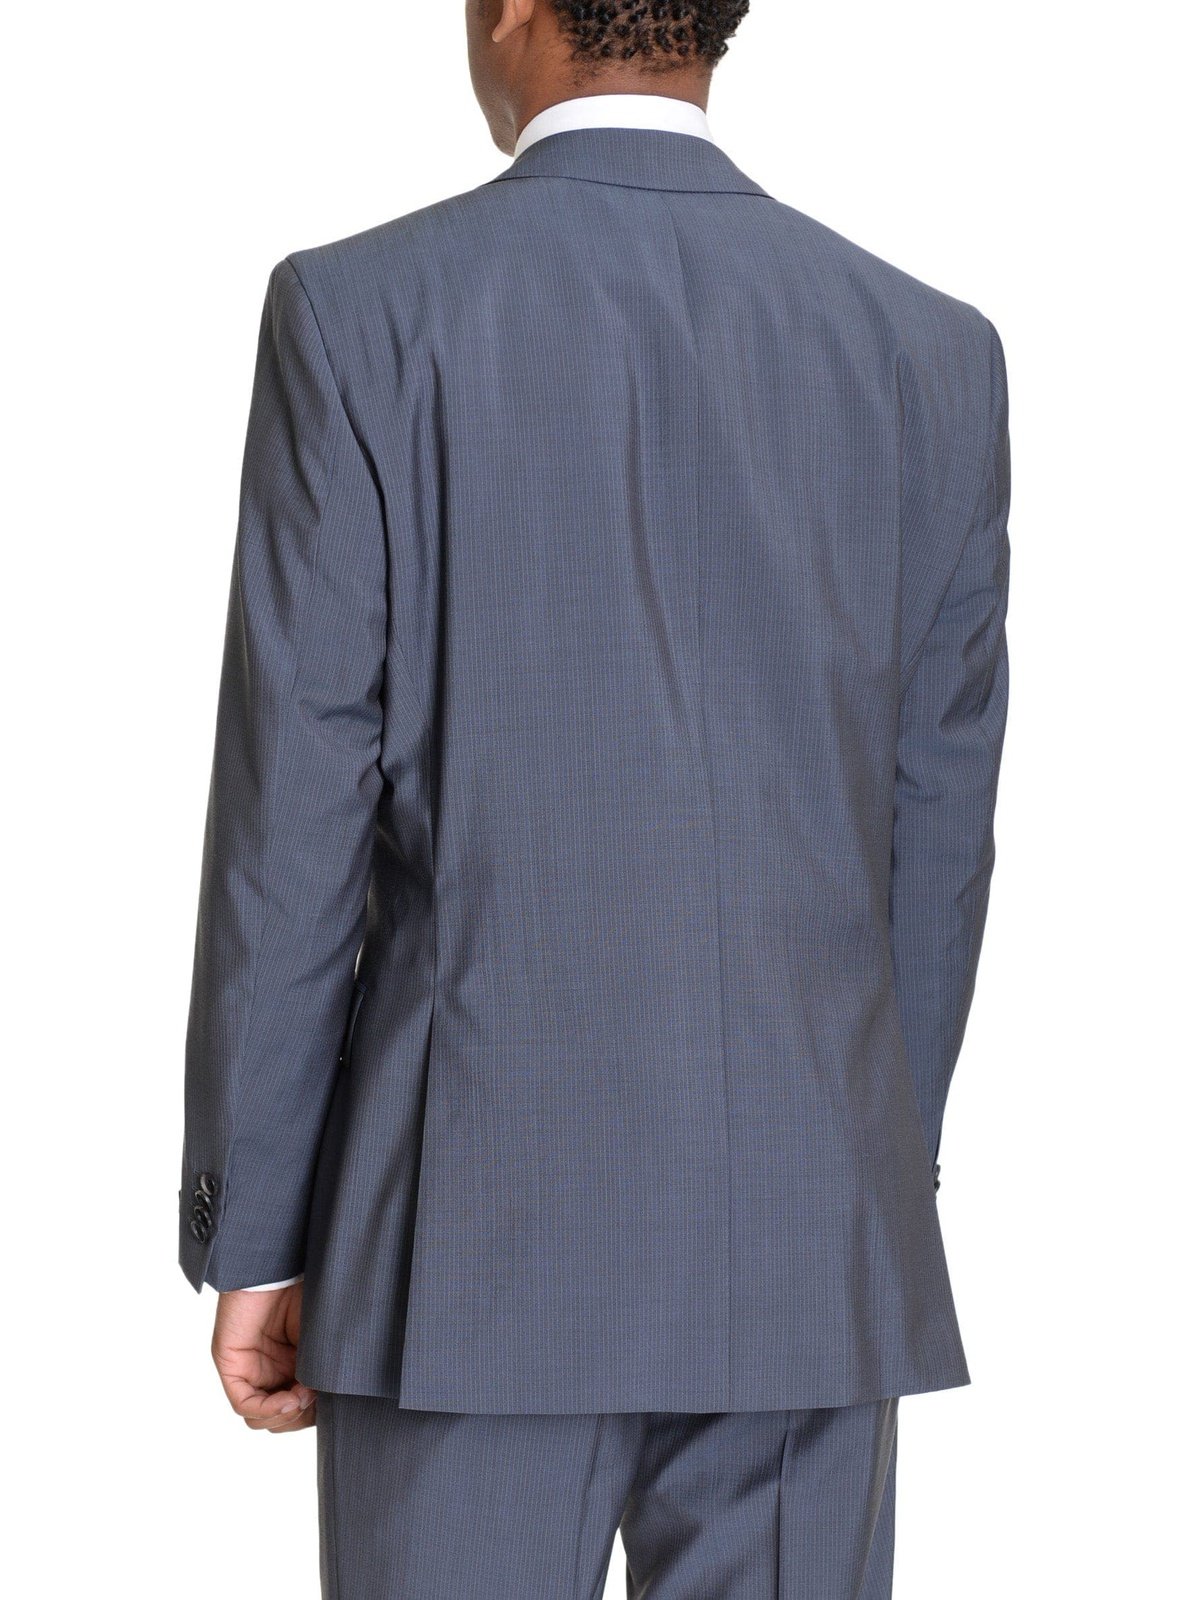 HUGO BOSS TWO PIECE SUITS Hugo Boss Paolini1/Movio1 Blue Gray Striped Two Button Wool Suit